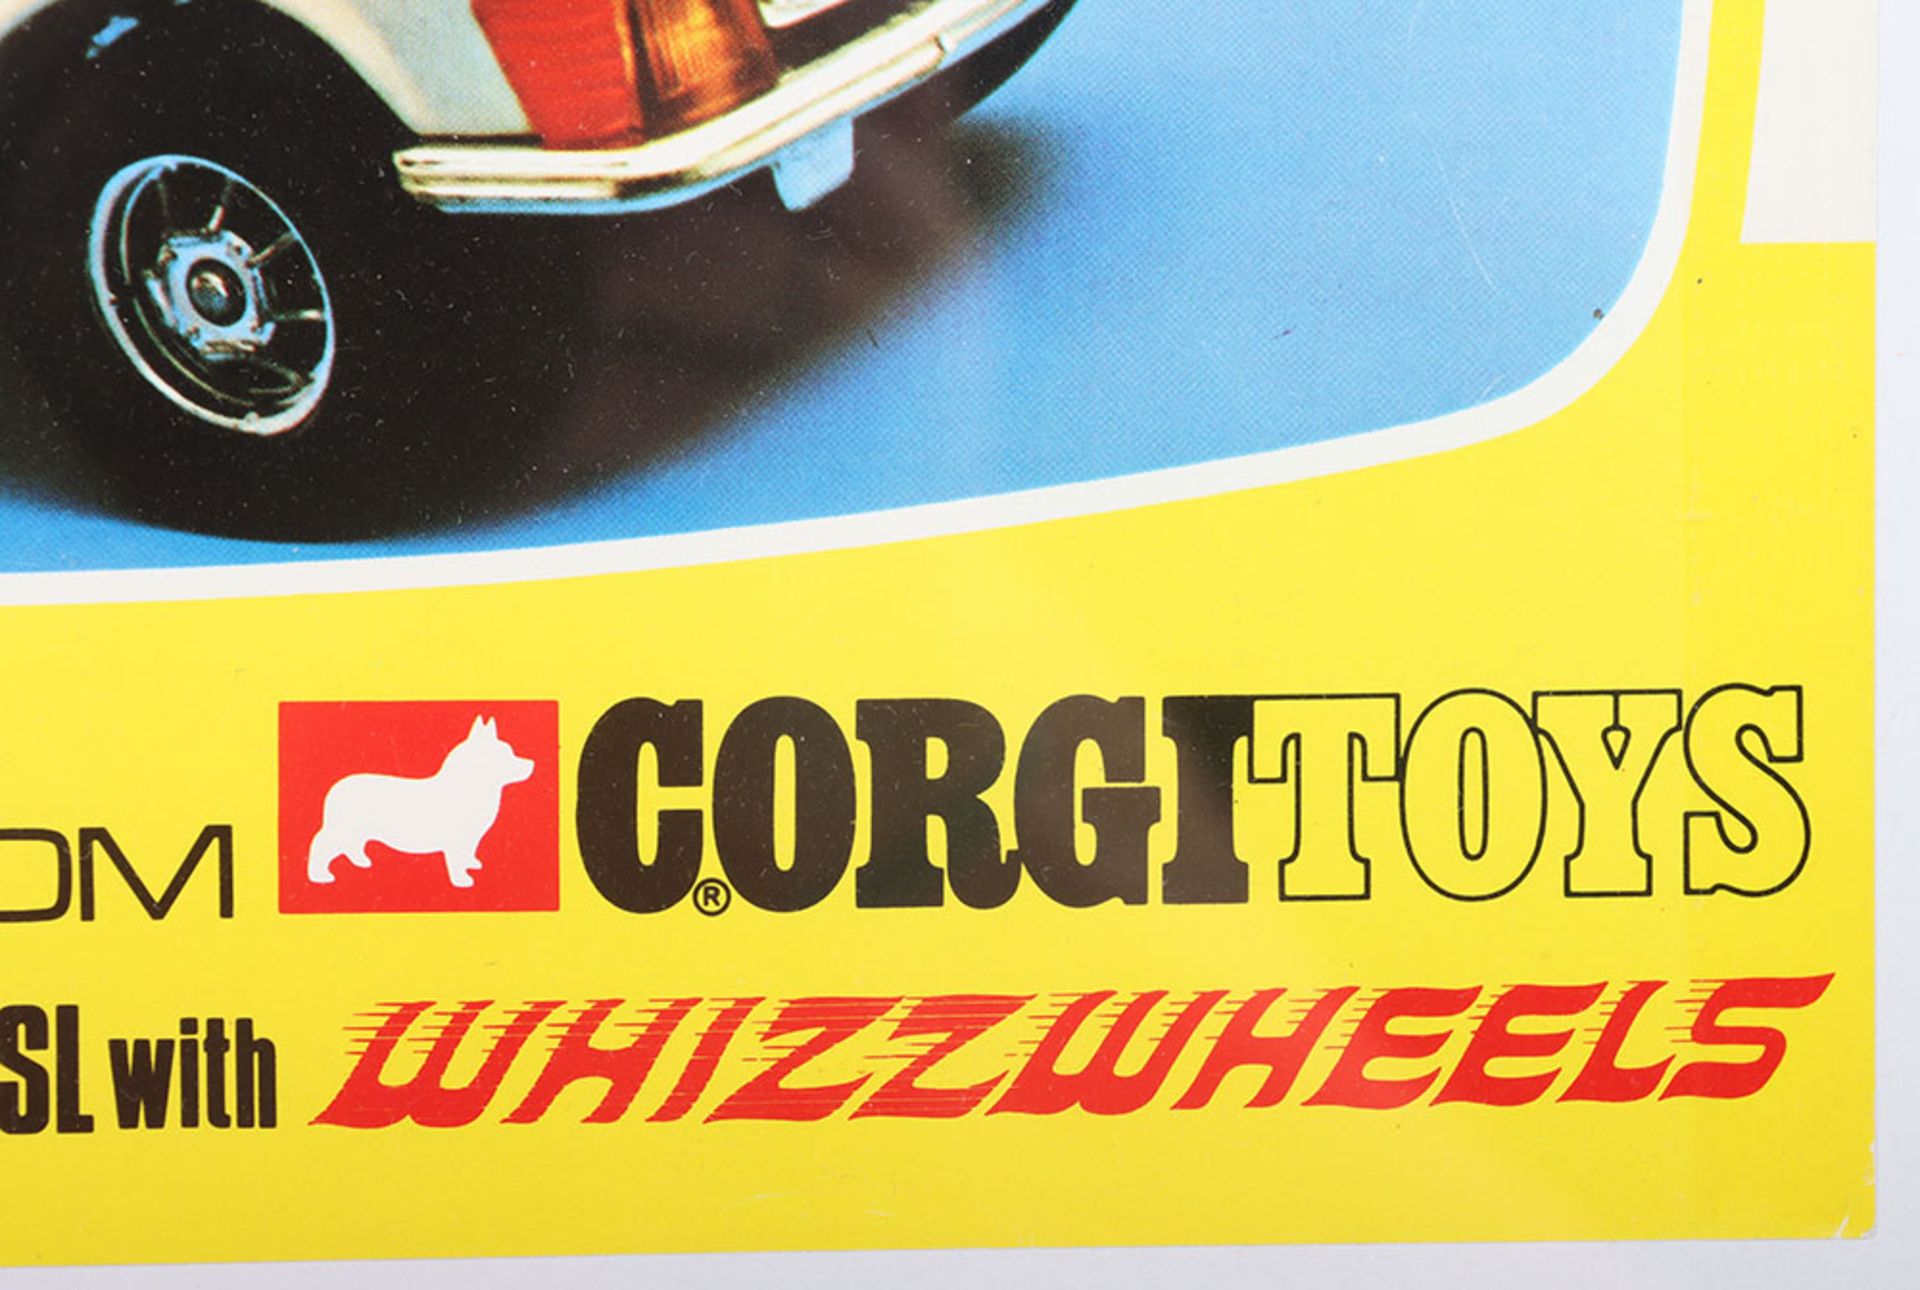 Original New from Corgi Toys 393 Mercedes Benz 350SL with Whizzwheels, Shop window poster - Image 4 of 5